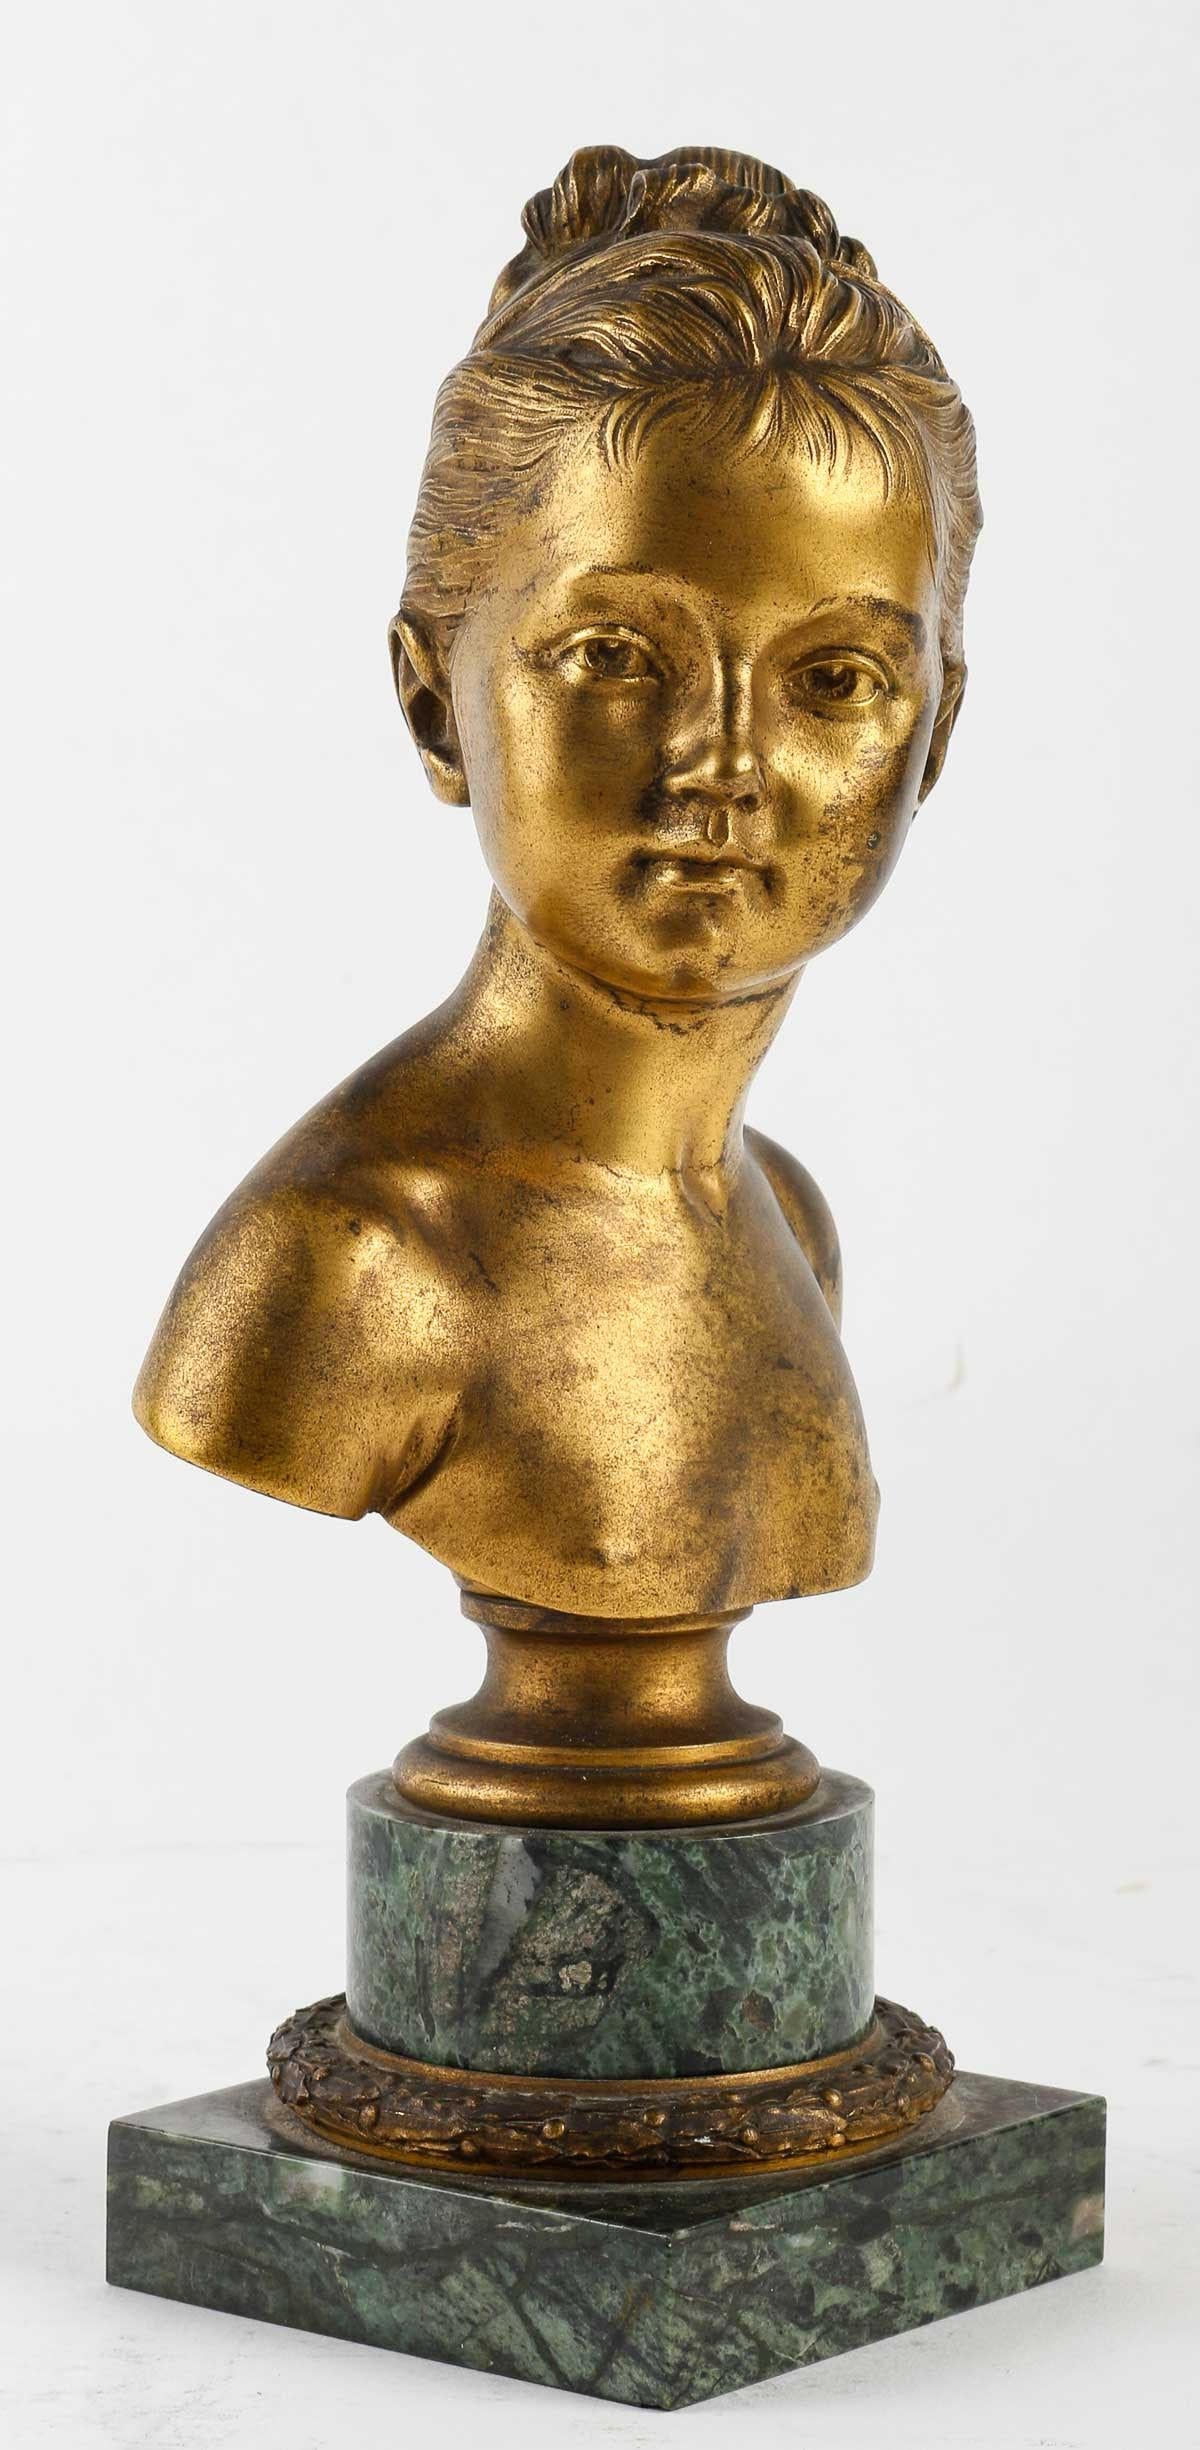 Gilded bronze bust of Louise Brongniart by Houdon.

Sculpture of a bust of Louise Brongniart by Jean-Antoine Houdon (1741-1828), reproduction of the XIXth century.    
h: 23cm , w: 11cm, d: 8cm